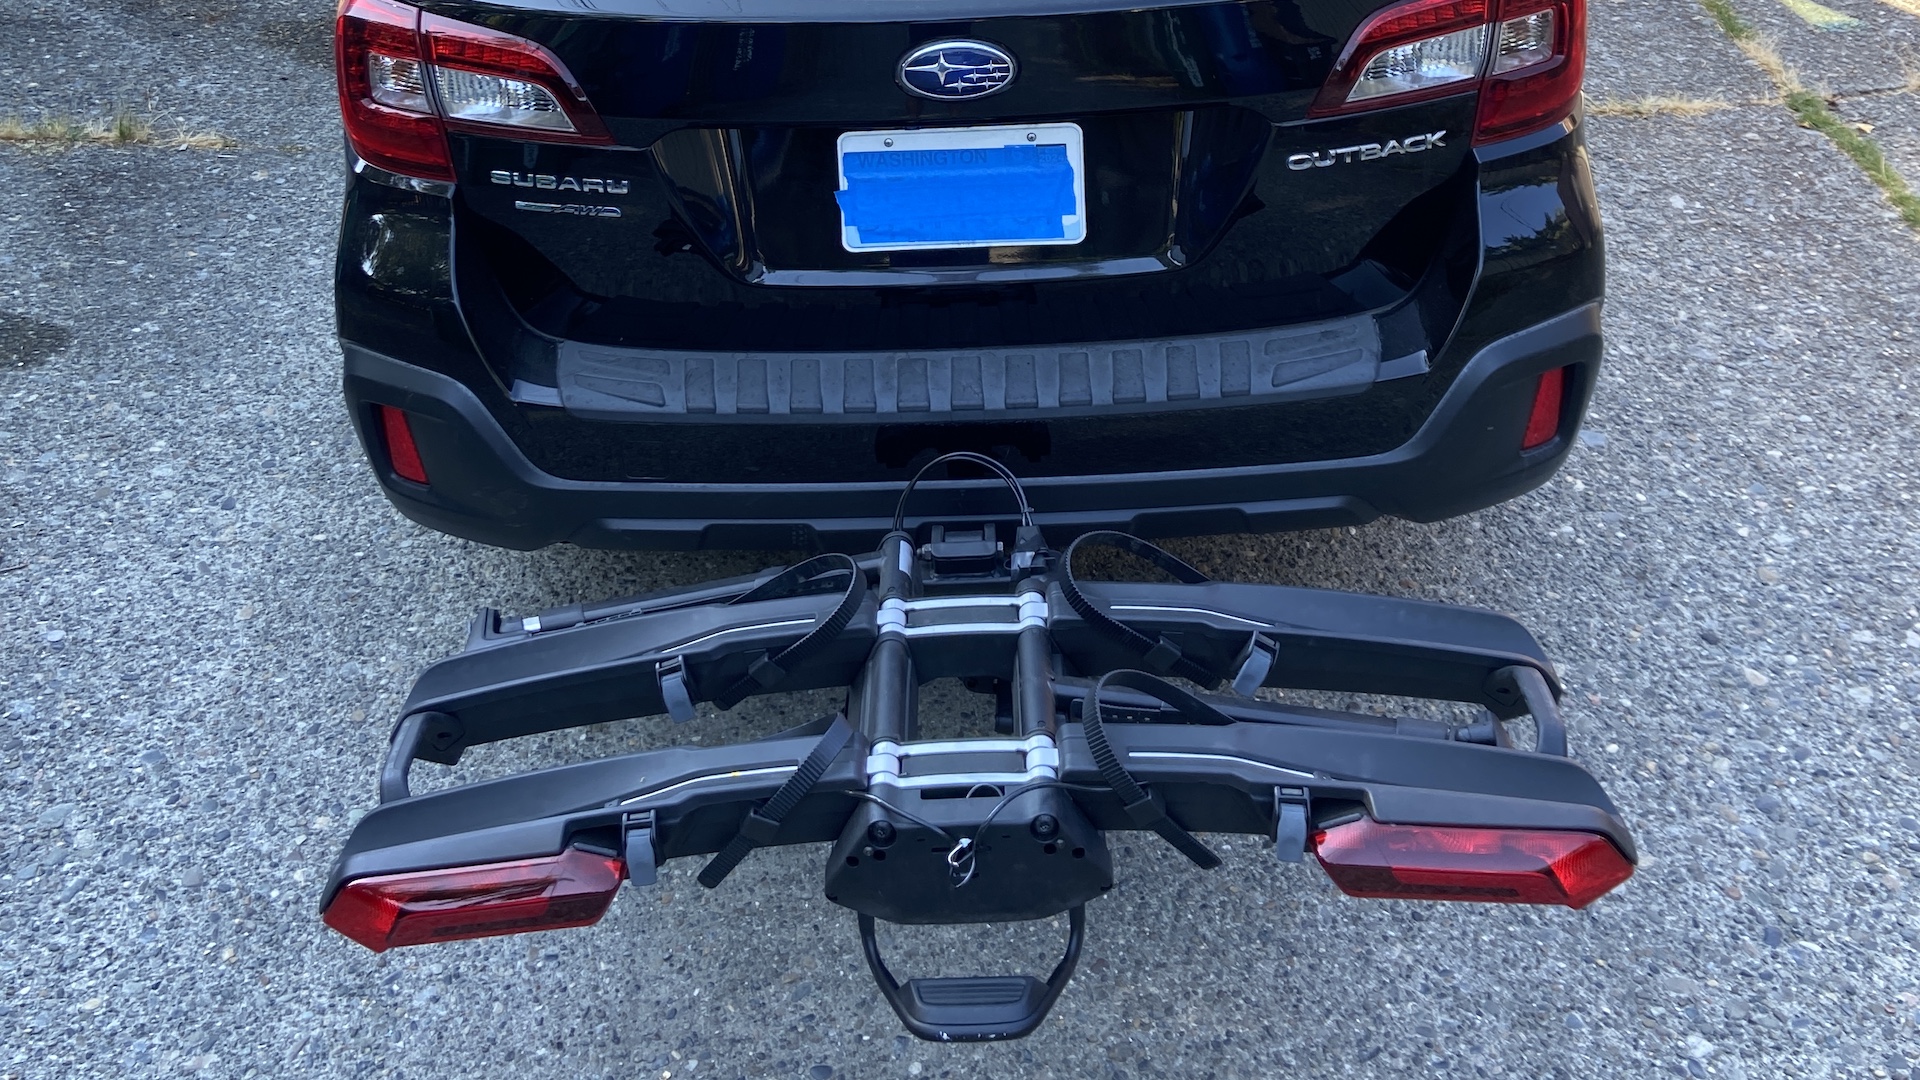 Thule Epos 2 with Lights bike rack review - feature-packed and foldable for  storage